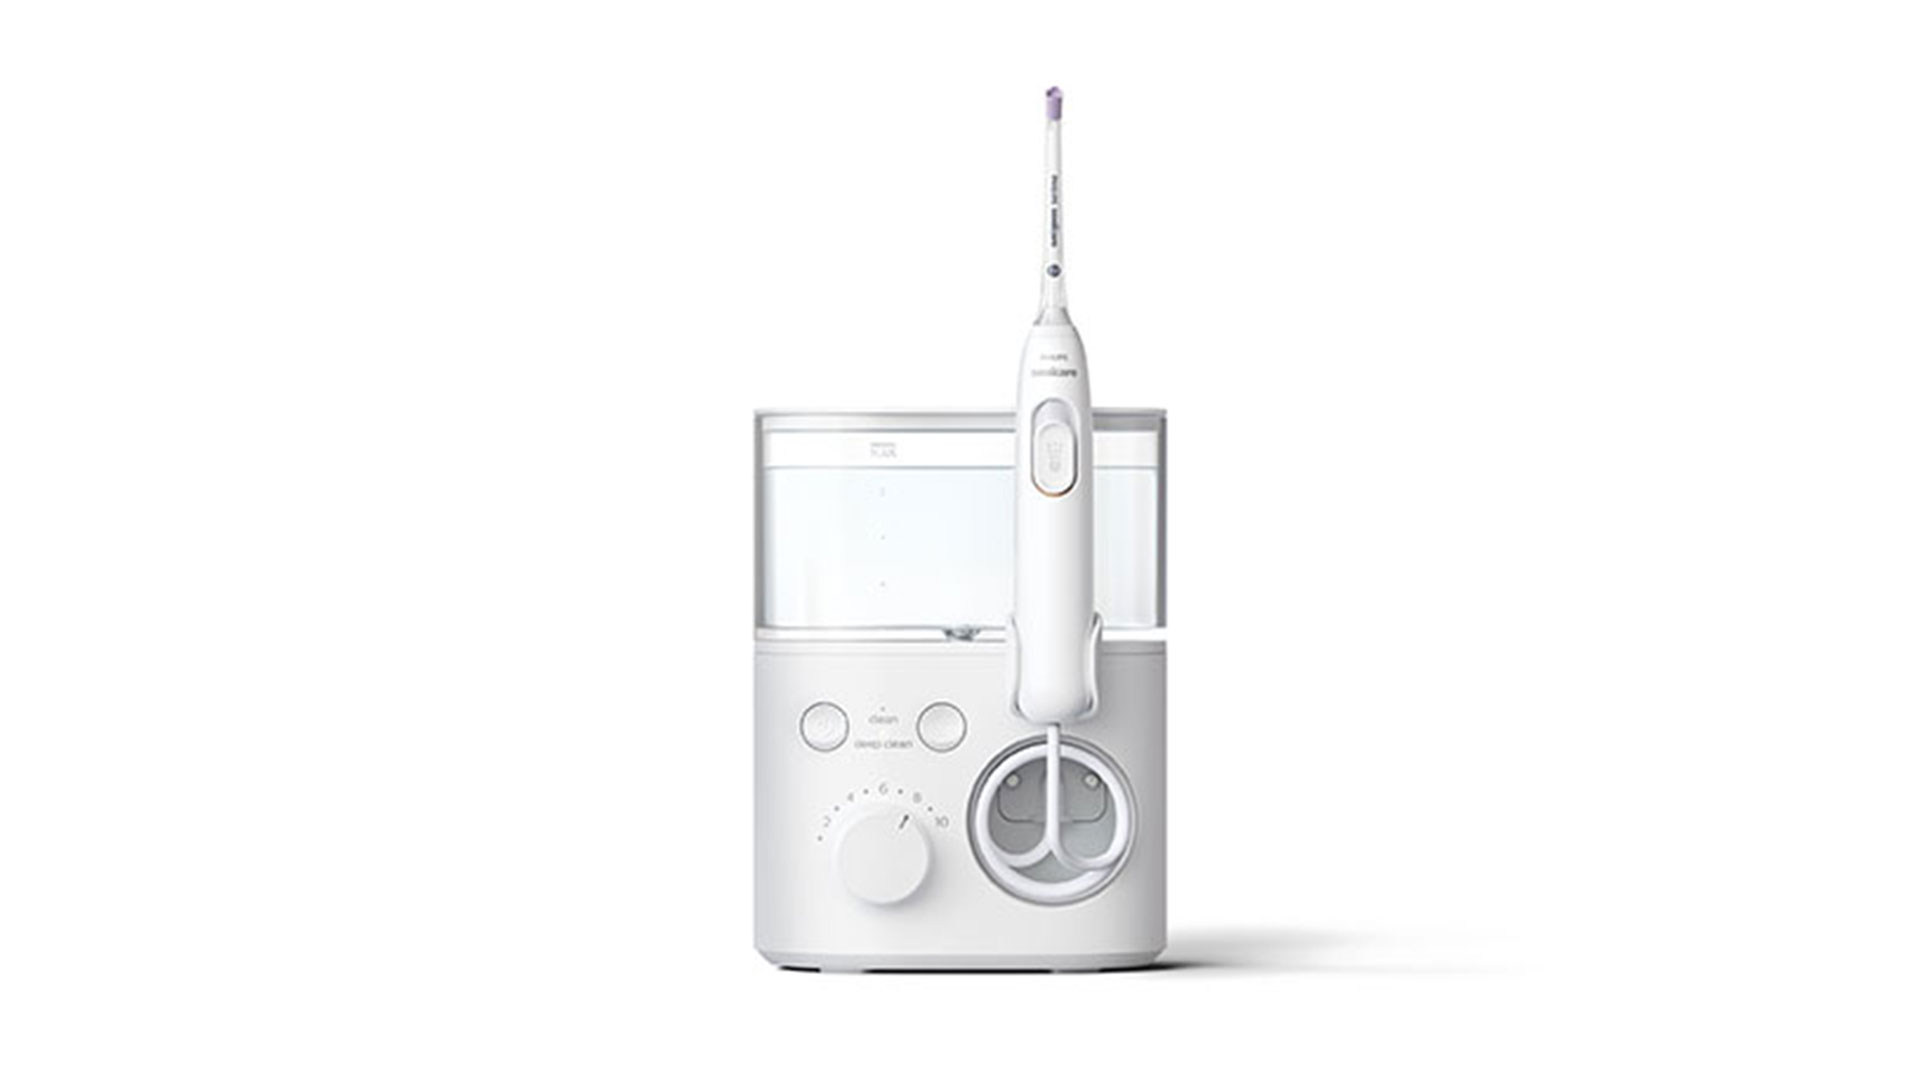 This Toothbrush Is Going to Change Your Entire Life